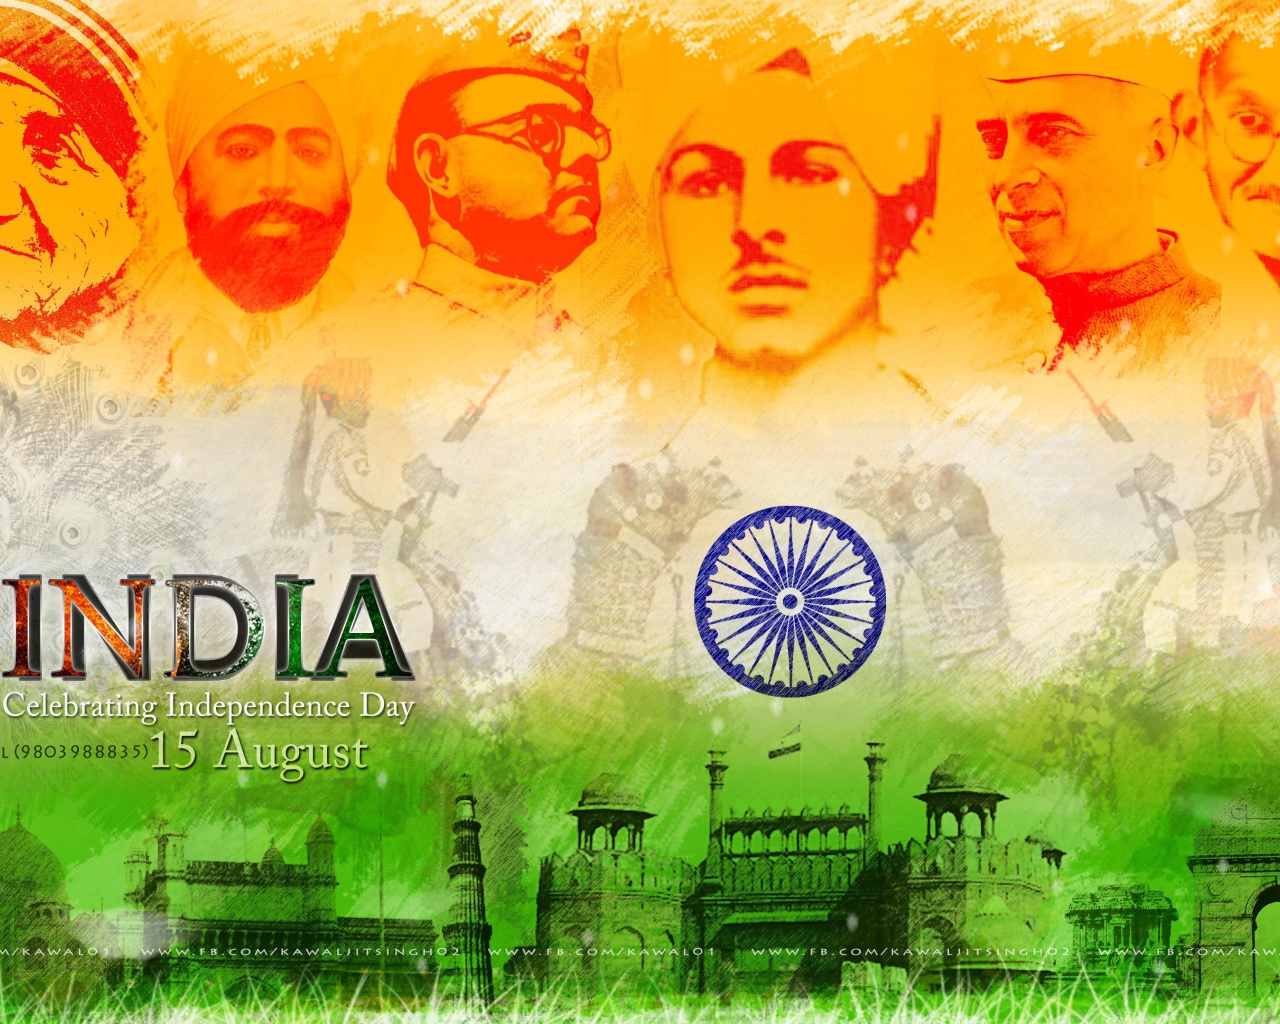 Das Independence Day India 15 August Wallpaper 1280x1024